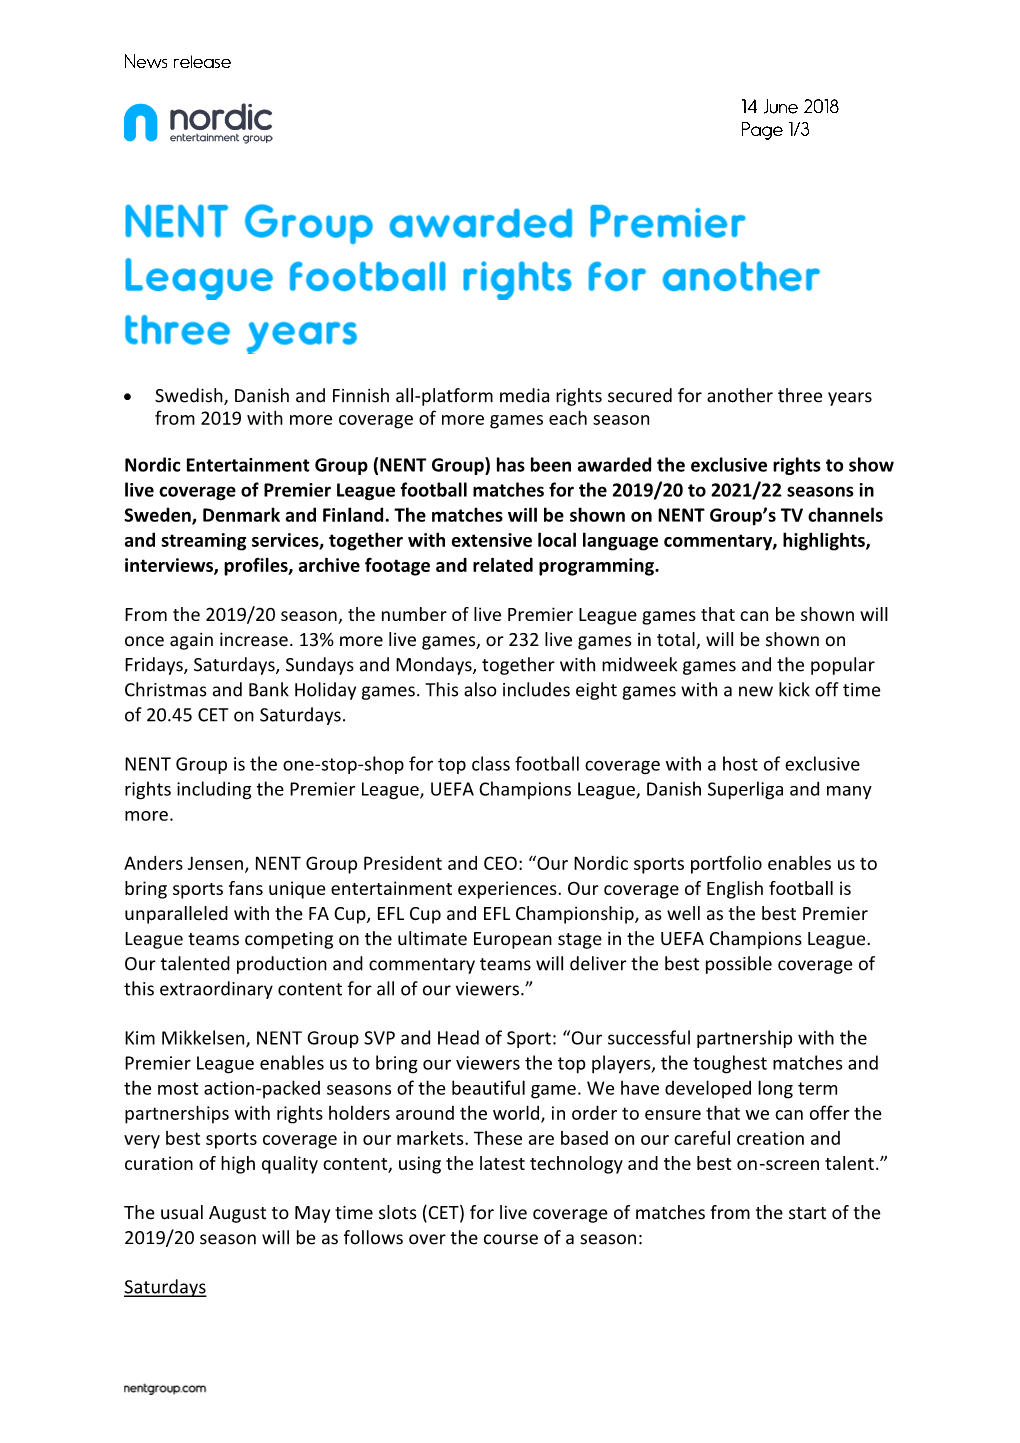 Premier League Rights Extended